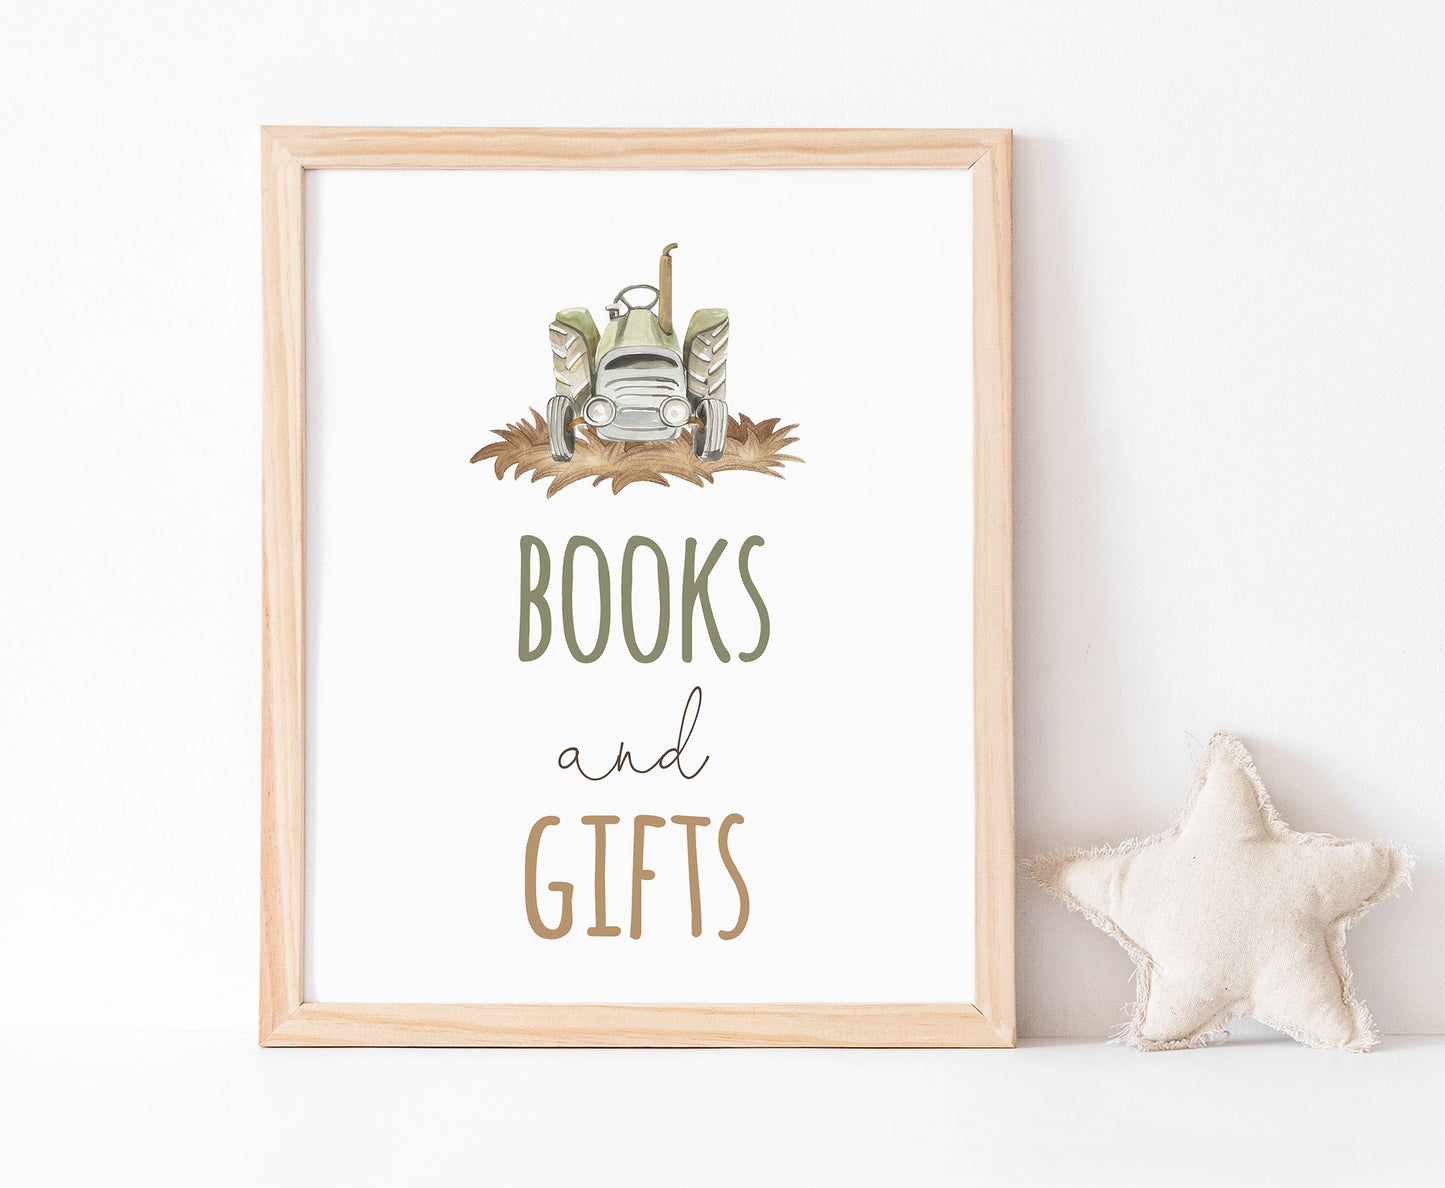 Books and gifts Sign Printable | Farm Party Table Decoration - 11E